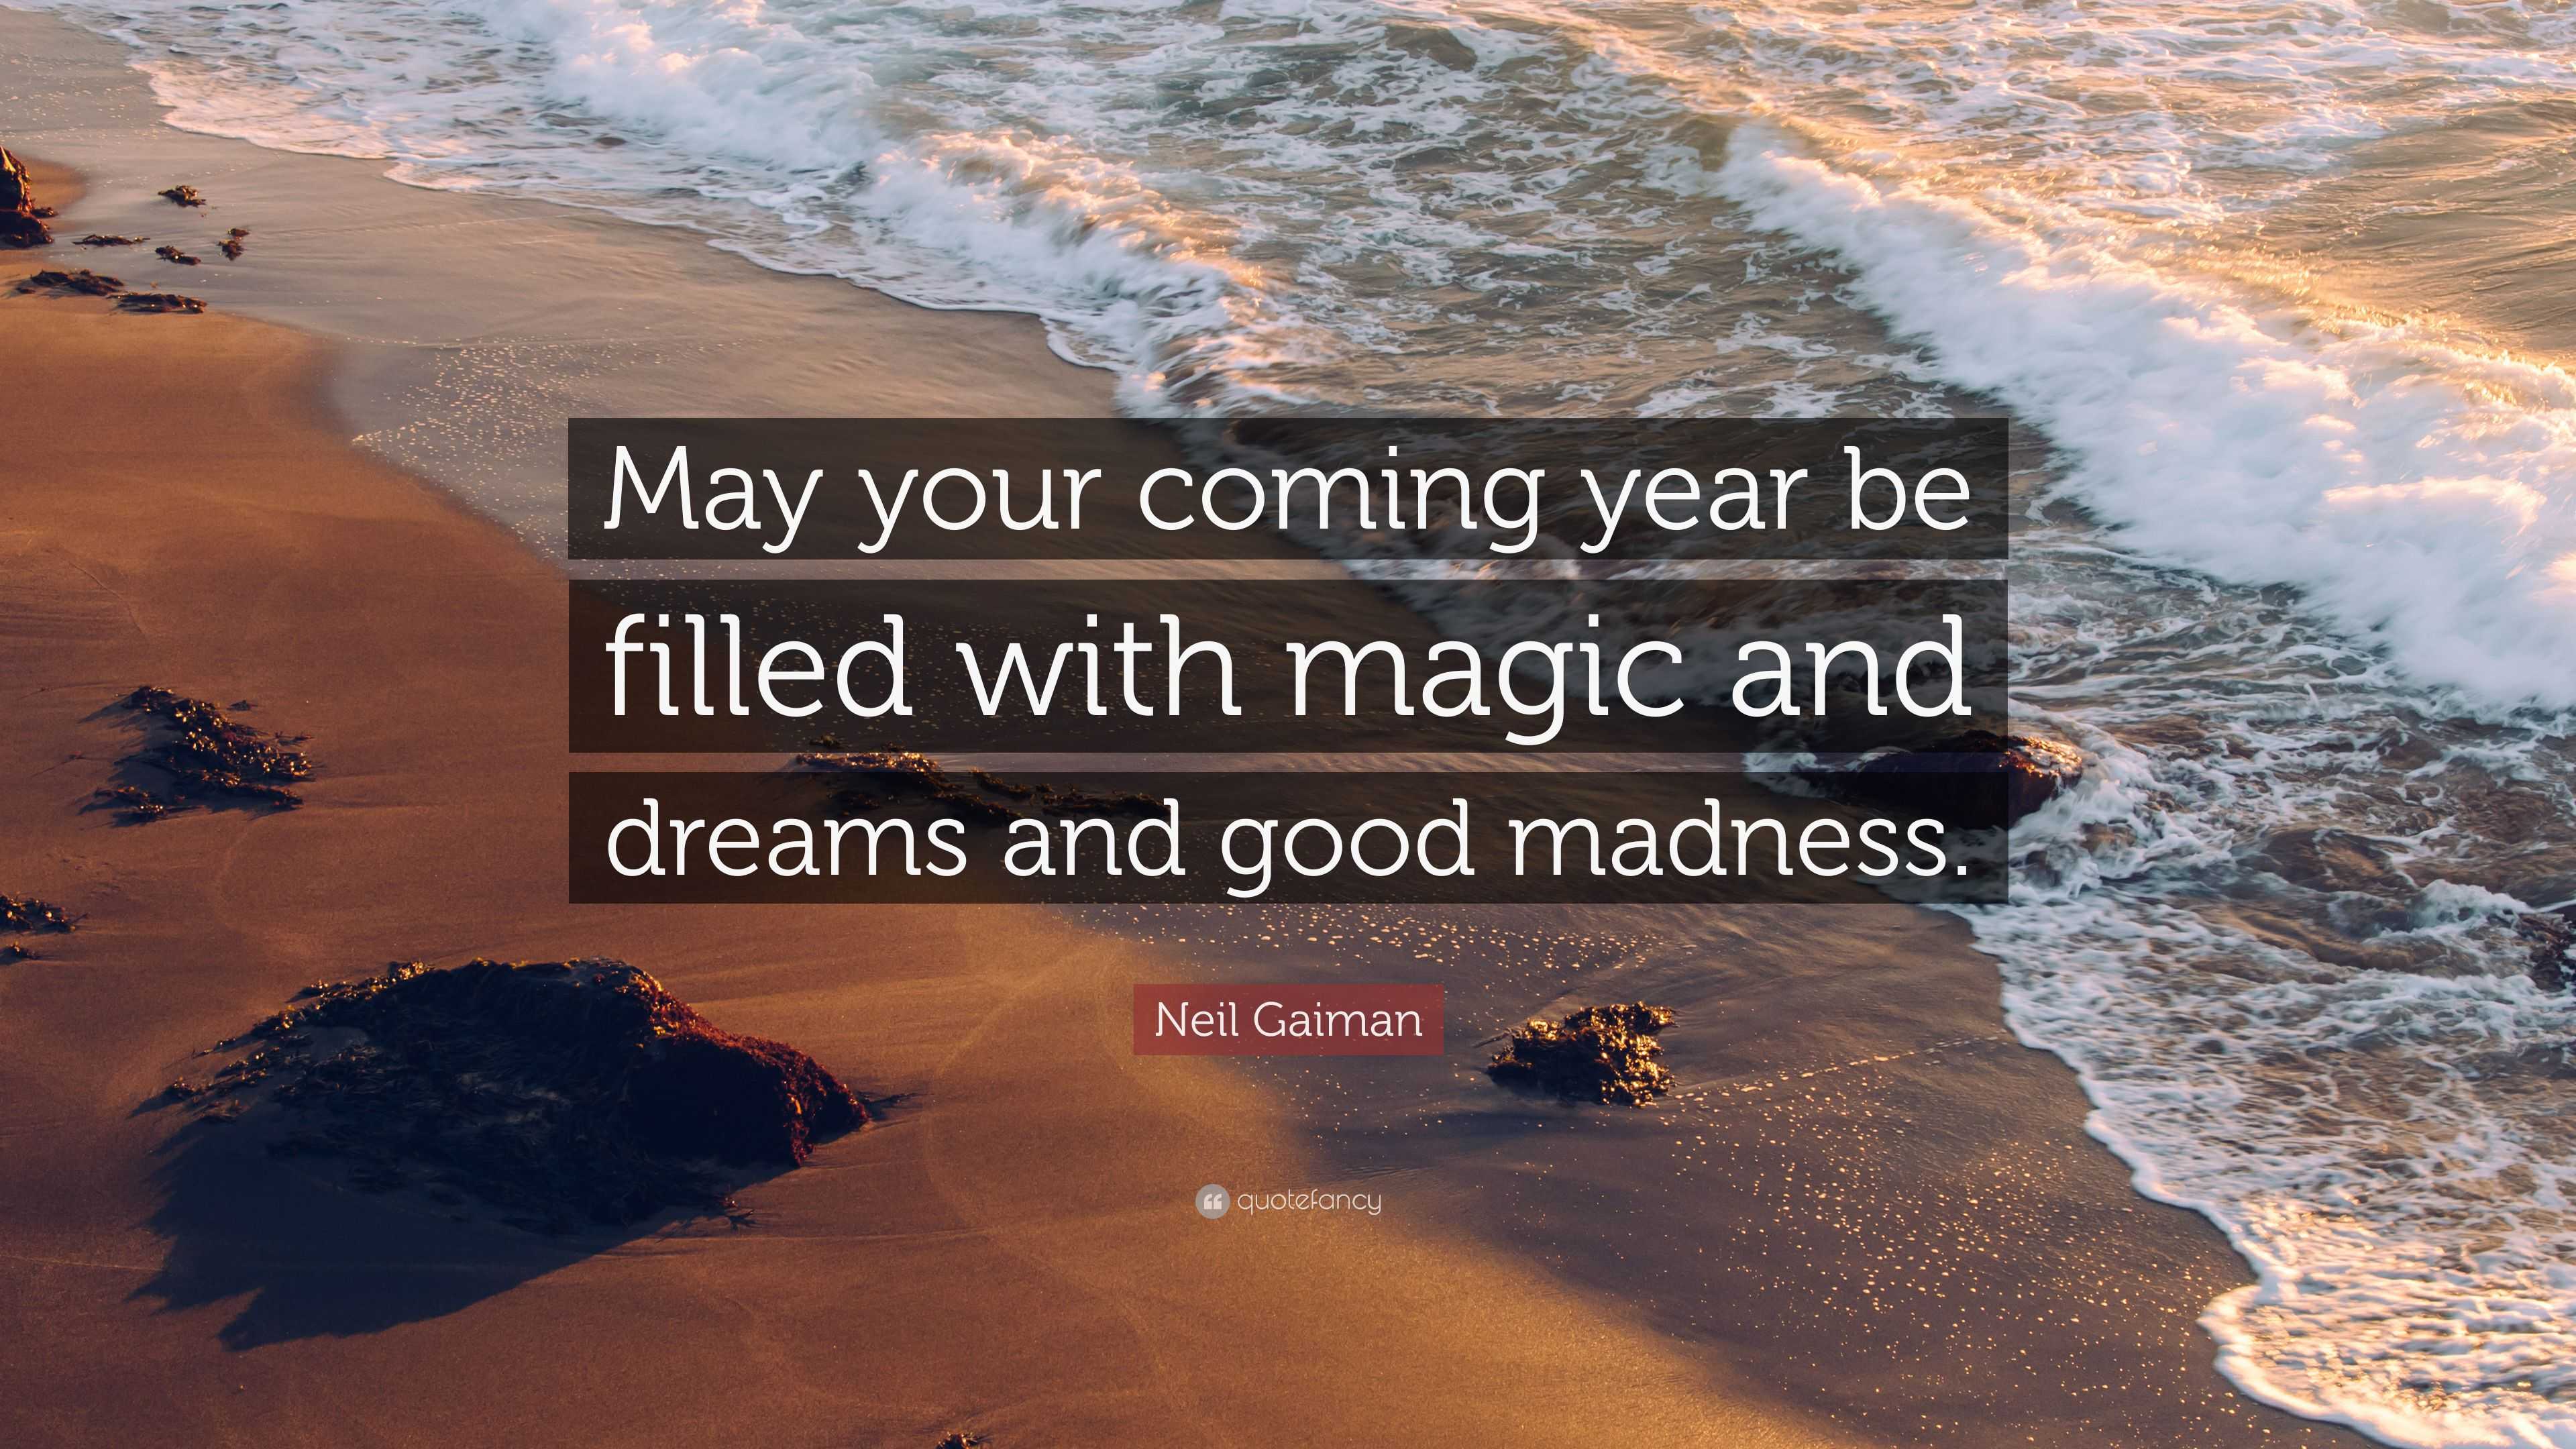 2059818 Neil Gaiman Quote May your coming year be filled with magic and